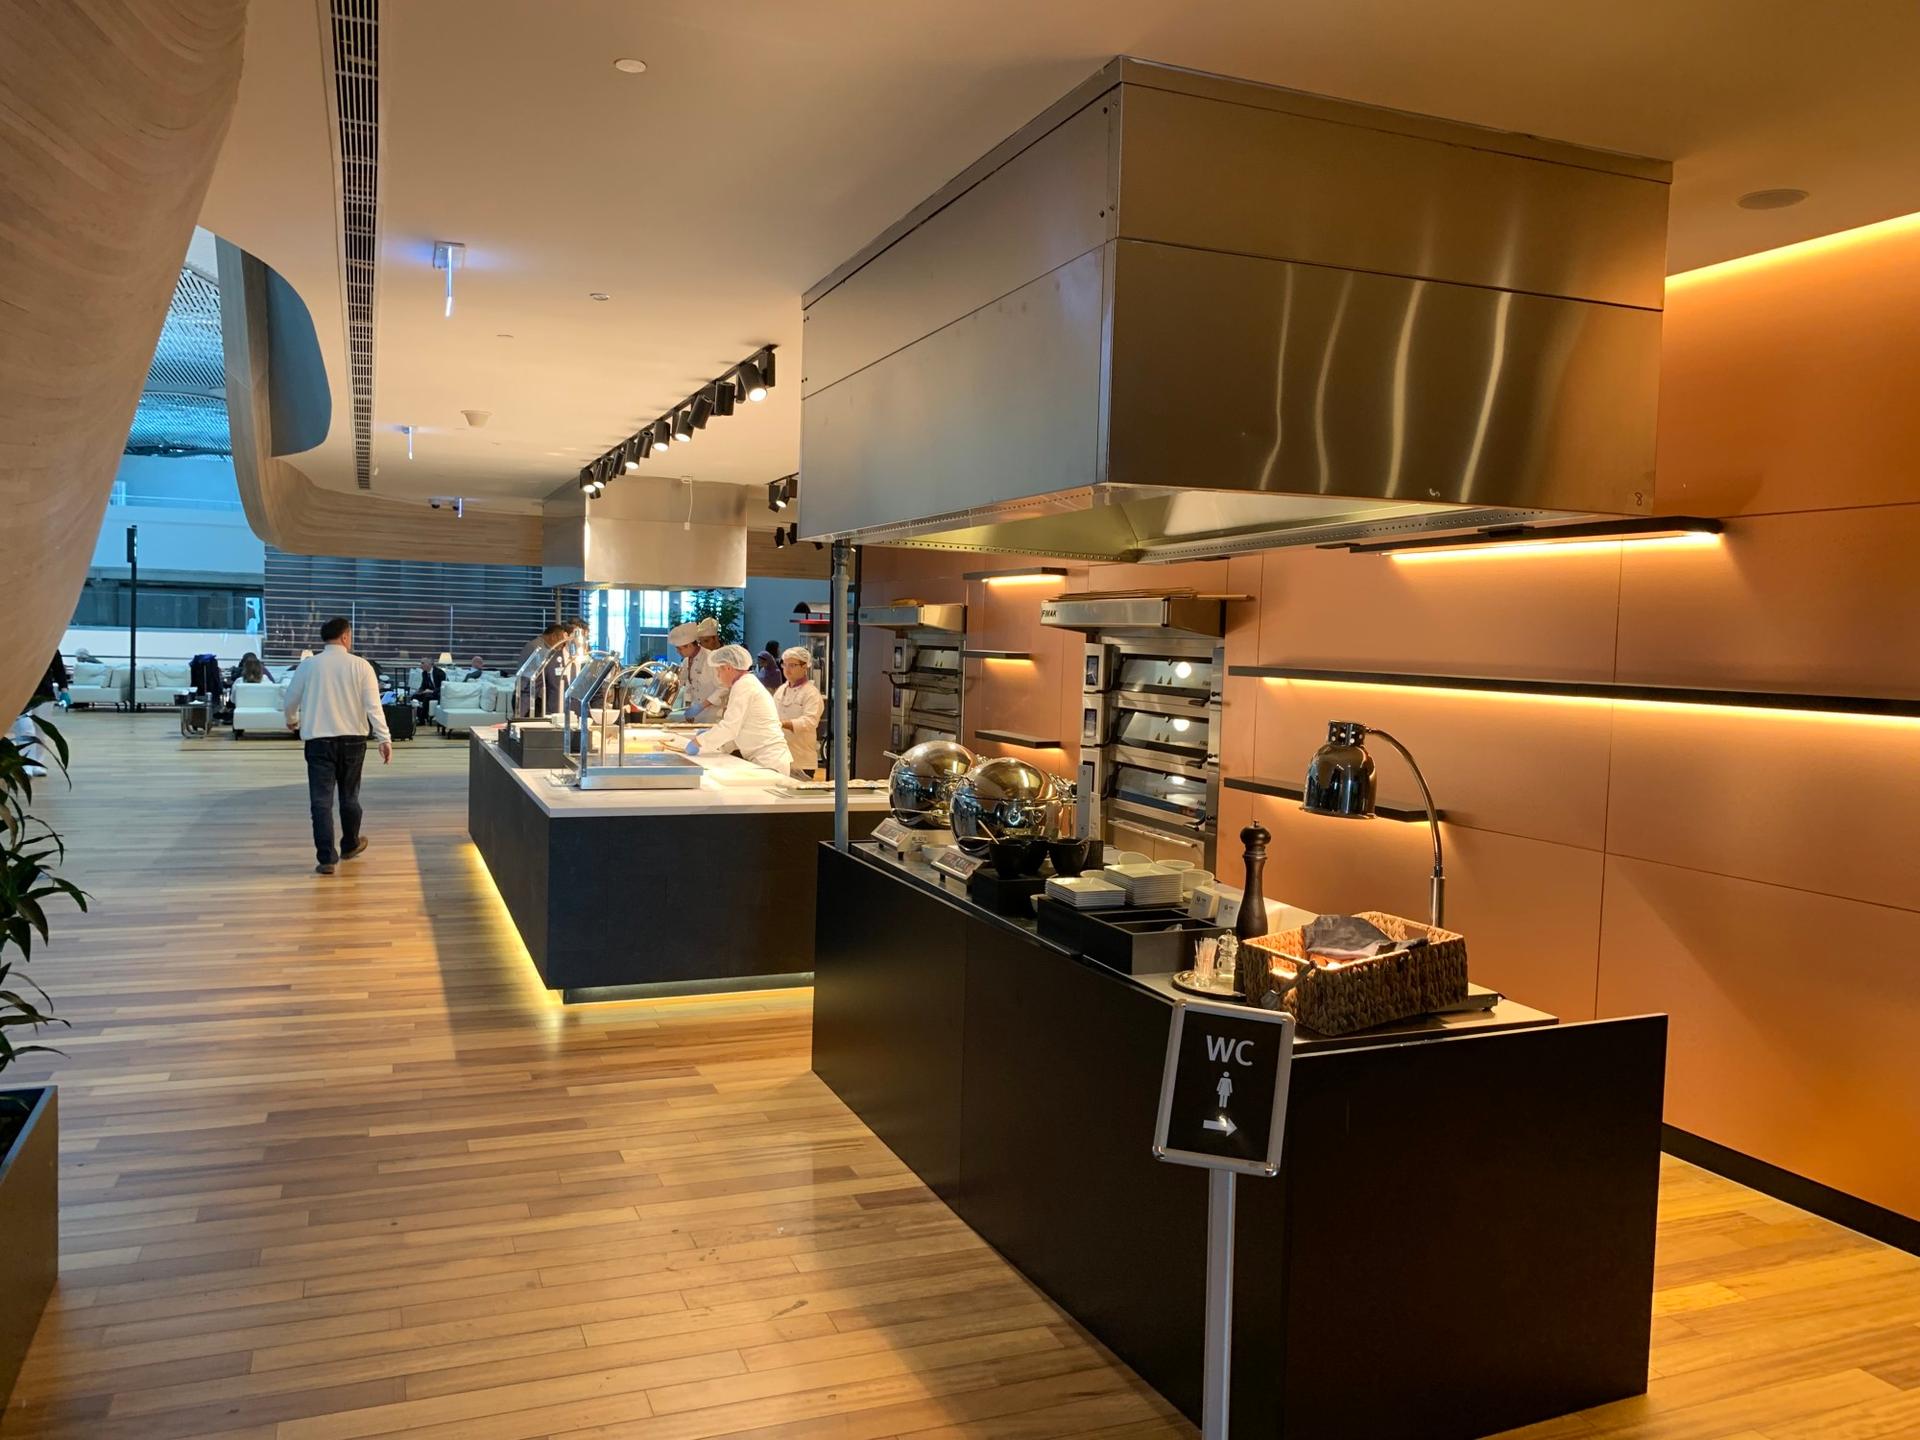 Turkish Airlines Business Lounge image 8 of 8